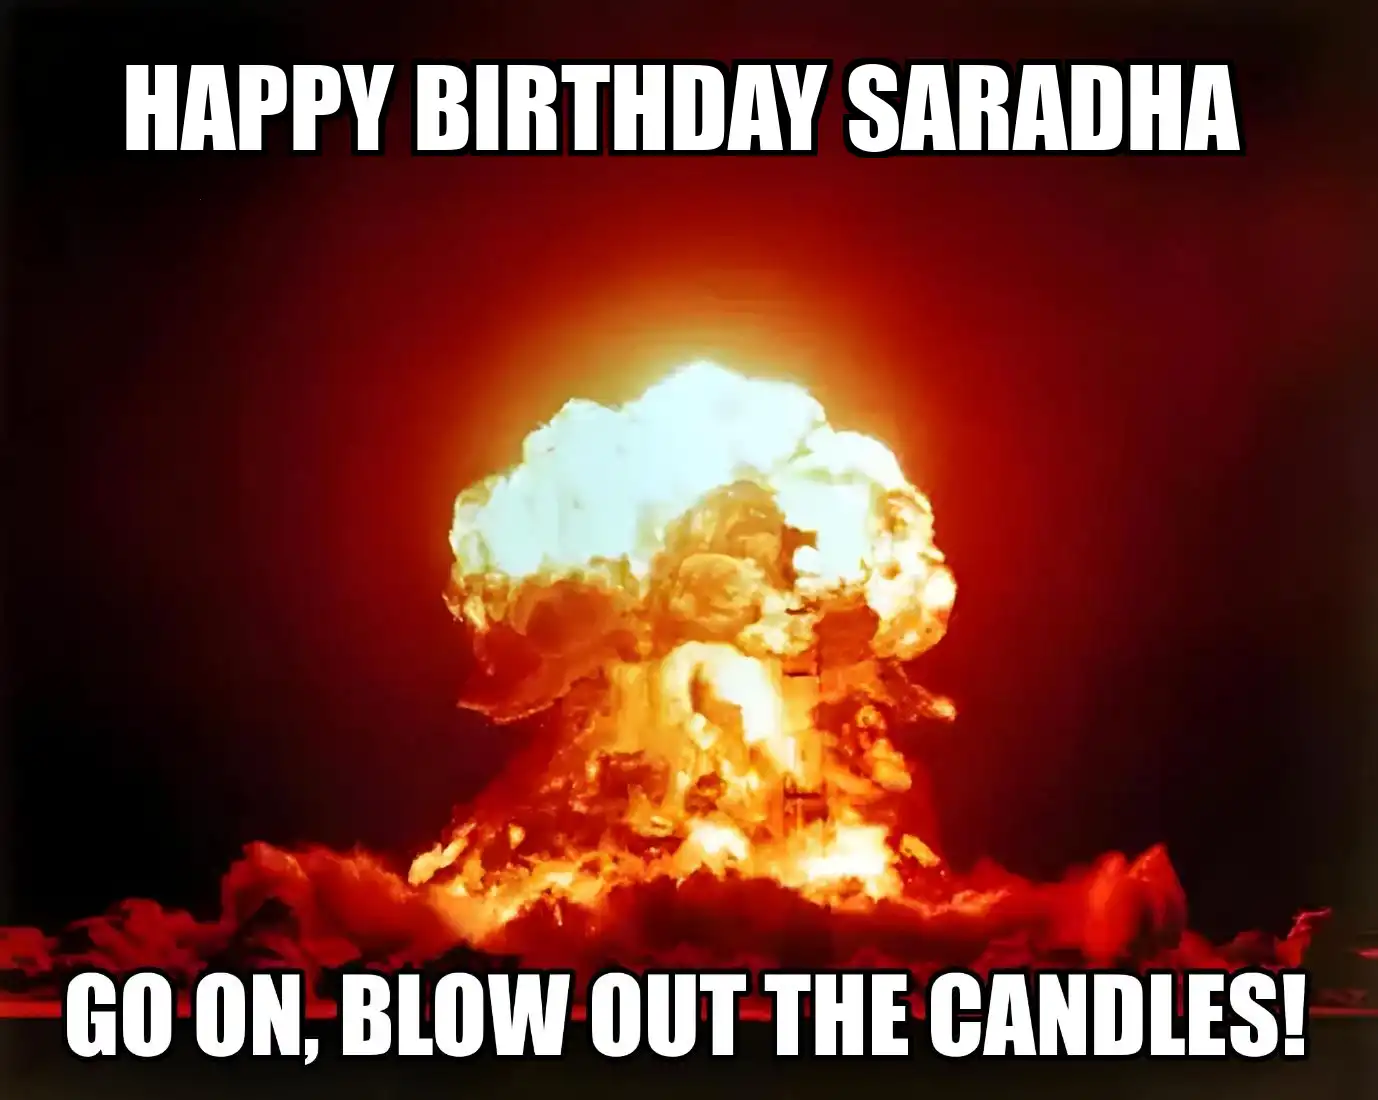 Happy Birthday Saradha Go On Blow Out The Candles Meme